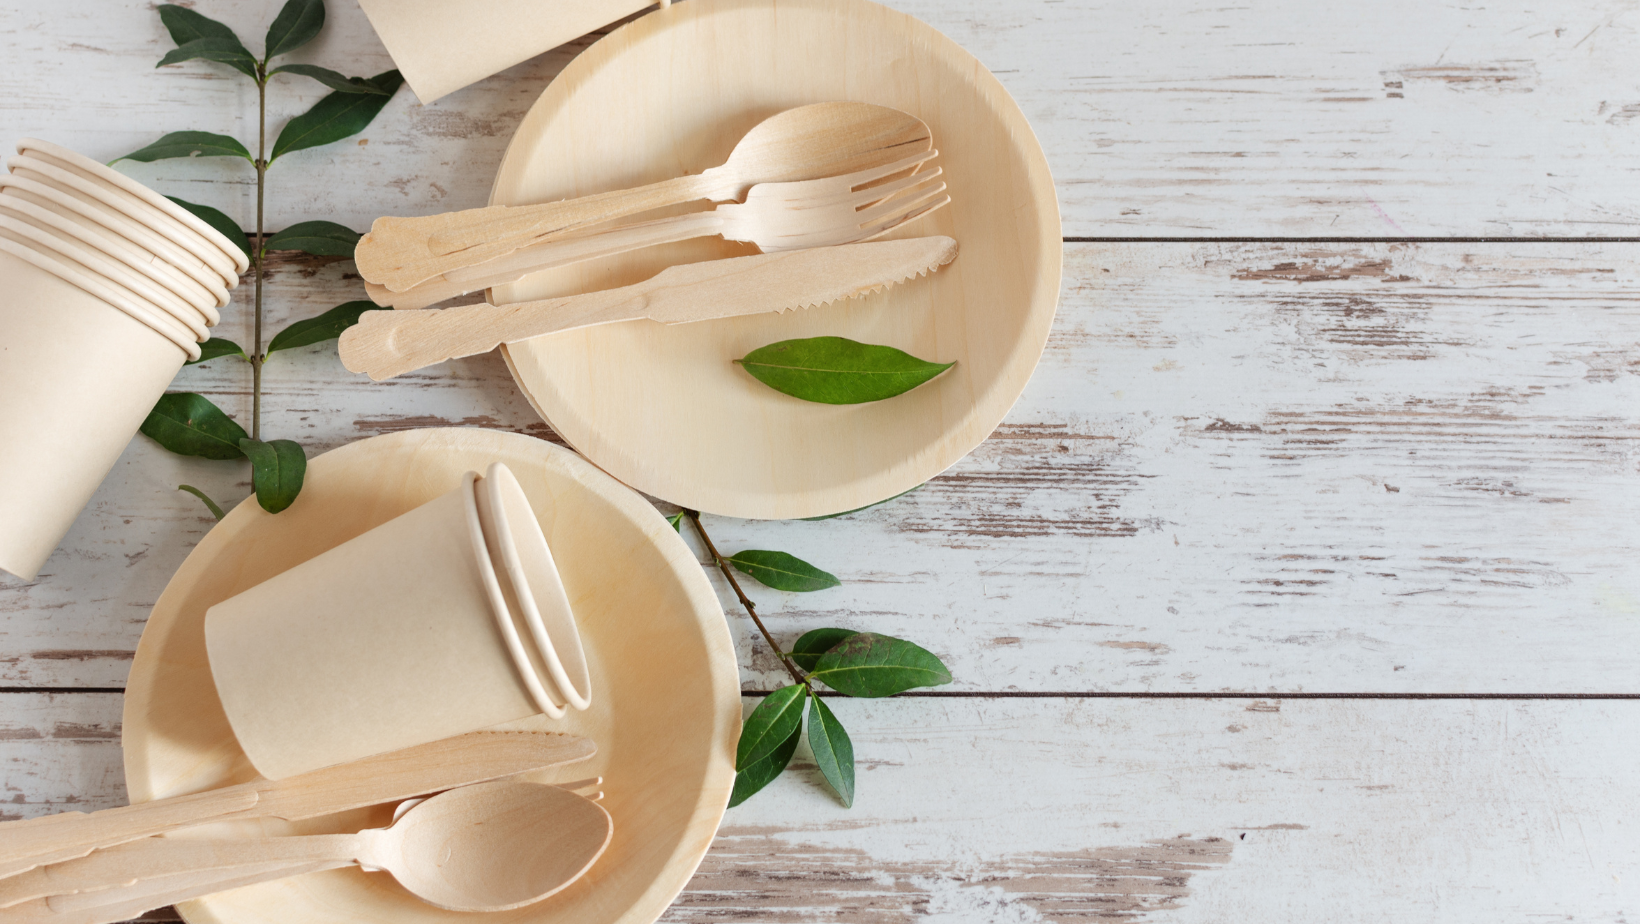 Eco friendly disposable dishes made of bamboo wood and paper on white wooden background.